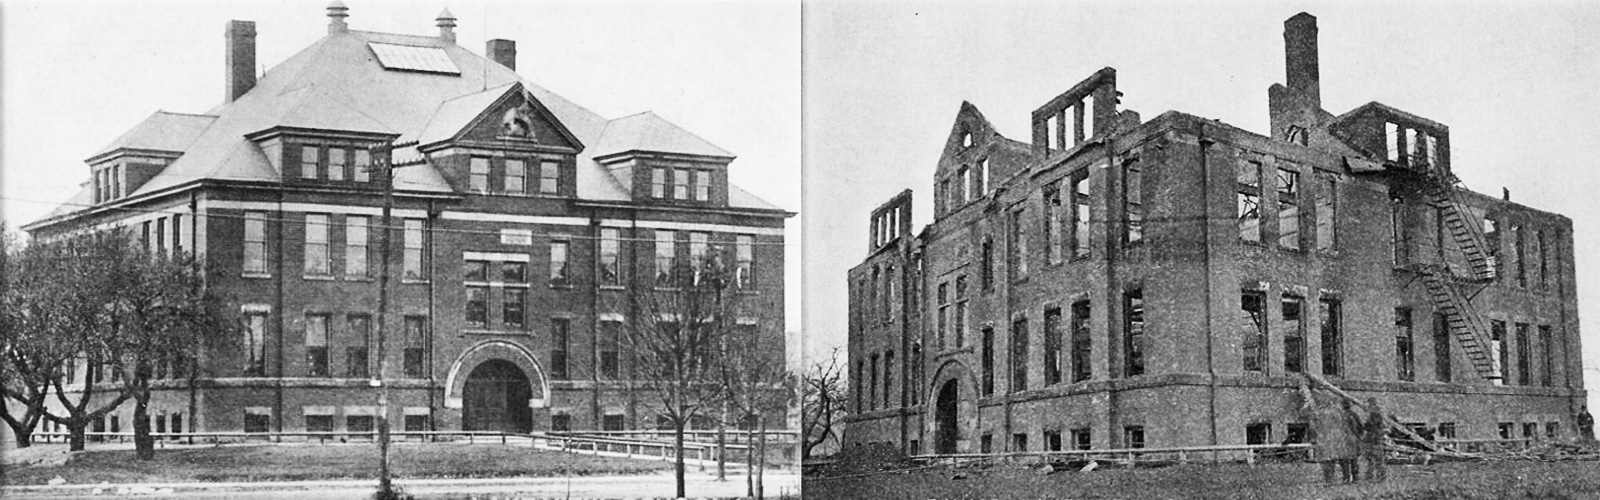 The Collinwood School Fire, Collinwood near Cleveland, Ohio, kills 174 people on March 4th, 1873